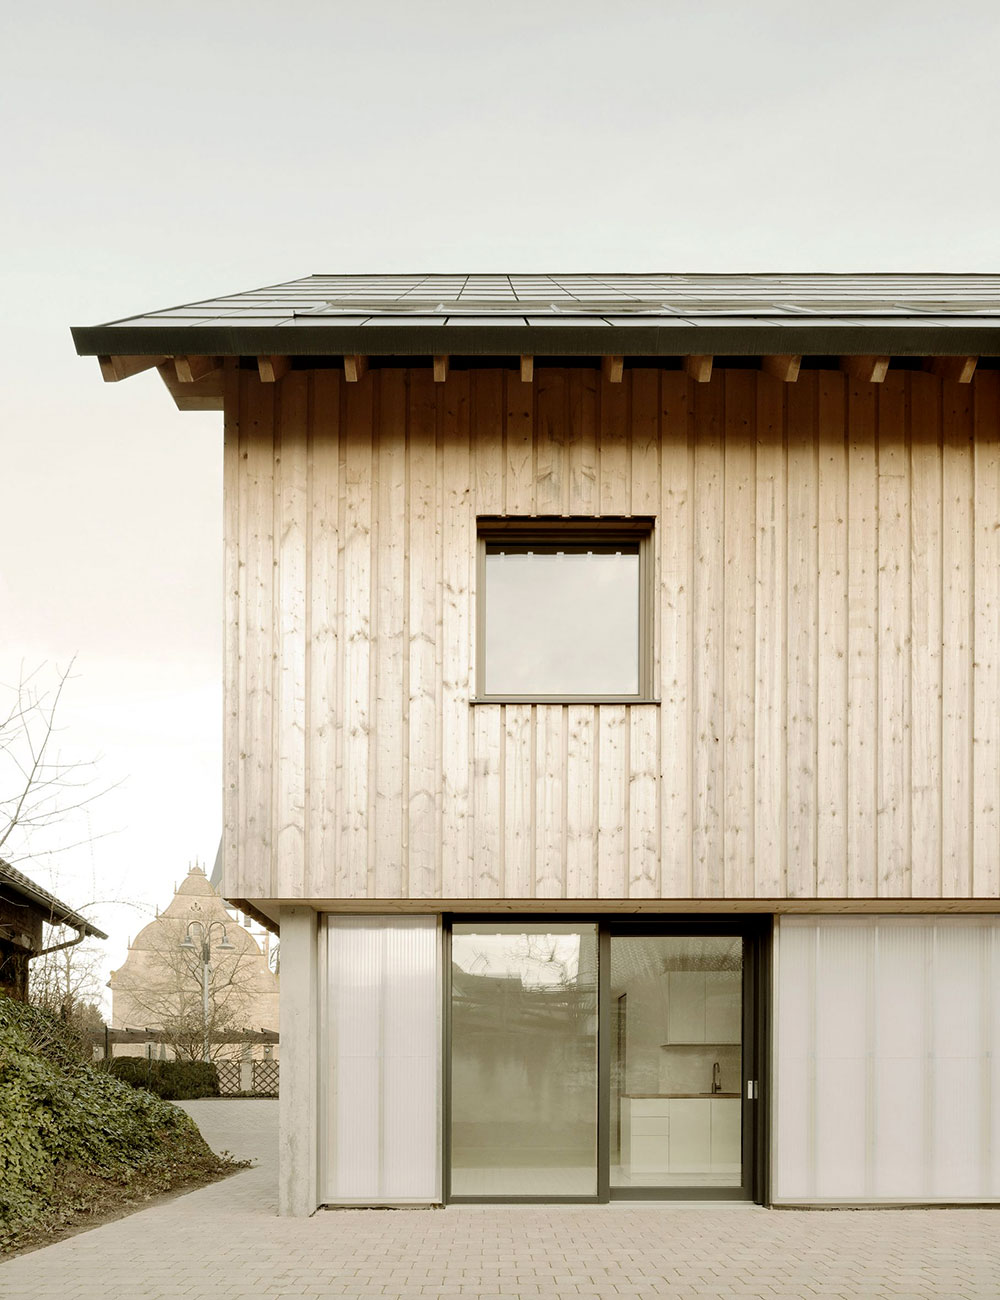 The Straw Bale House - Photo from dezeen.com